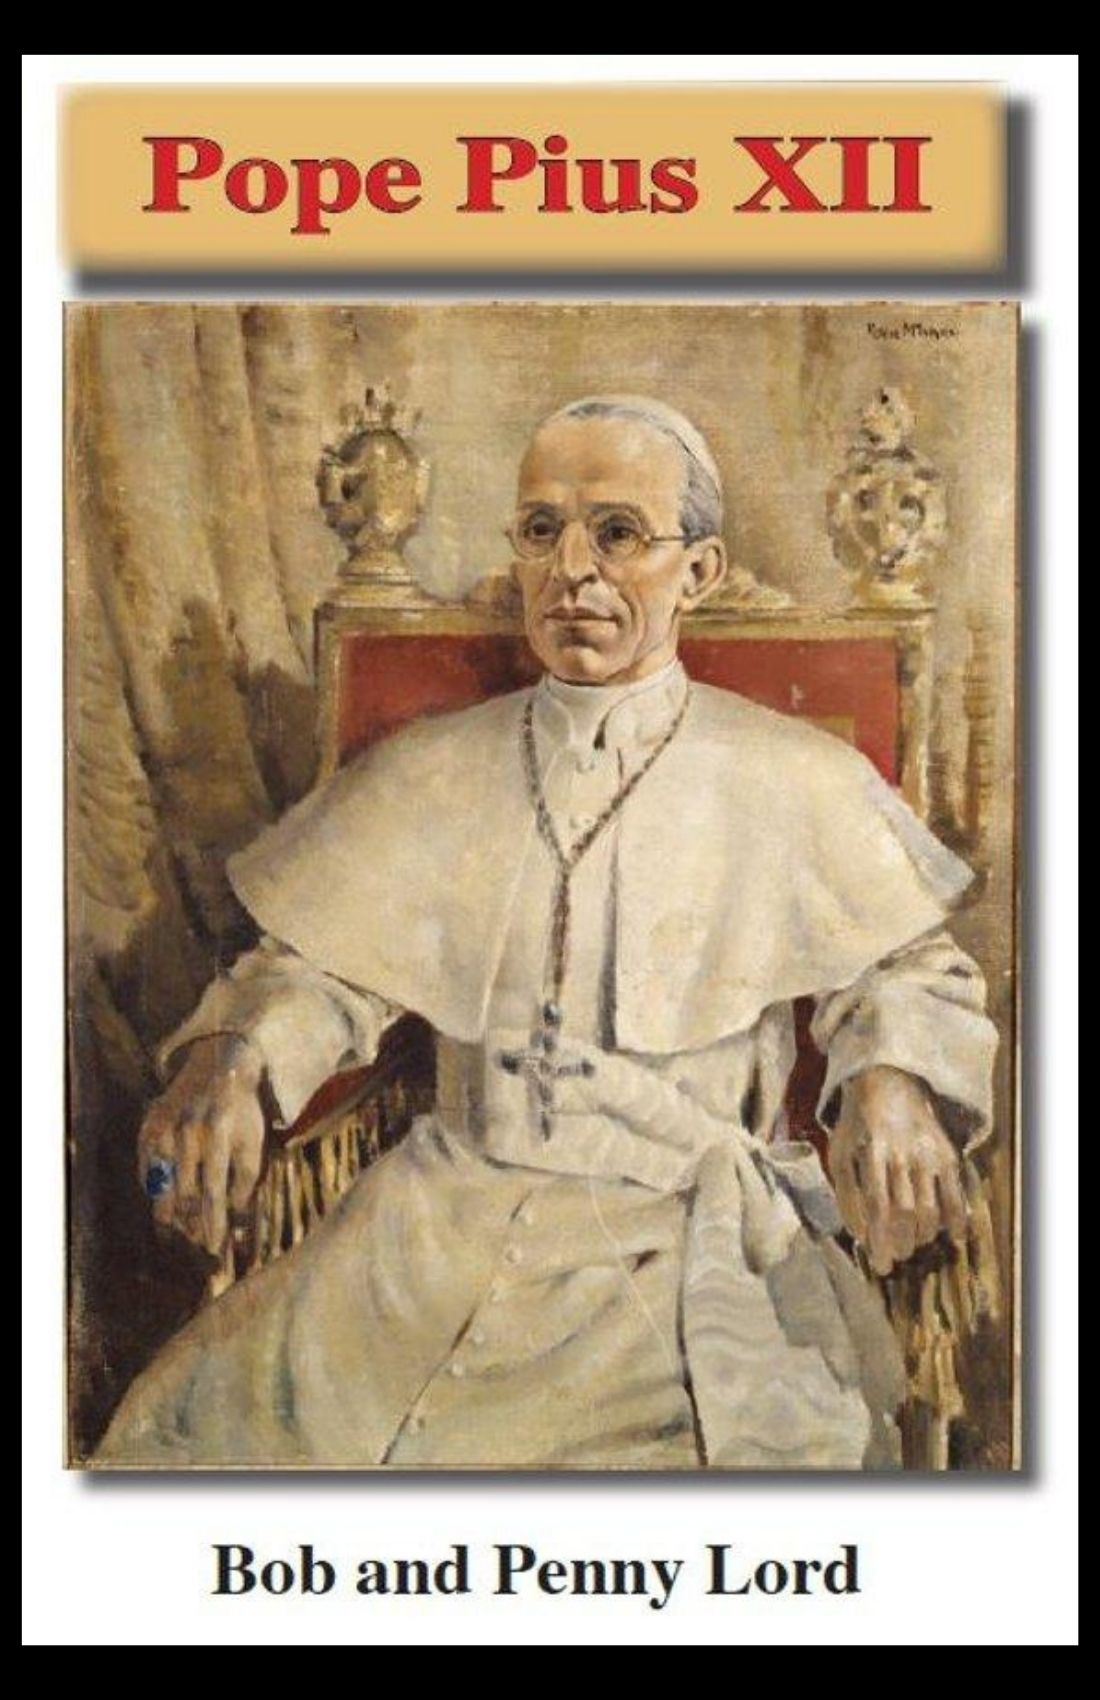 Pope Pius XII Minibook - Bob and Penny Lord